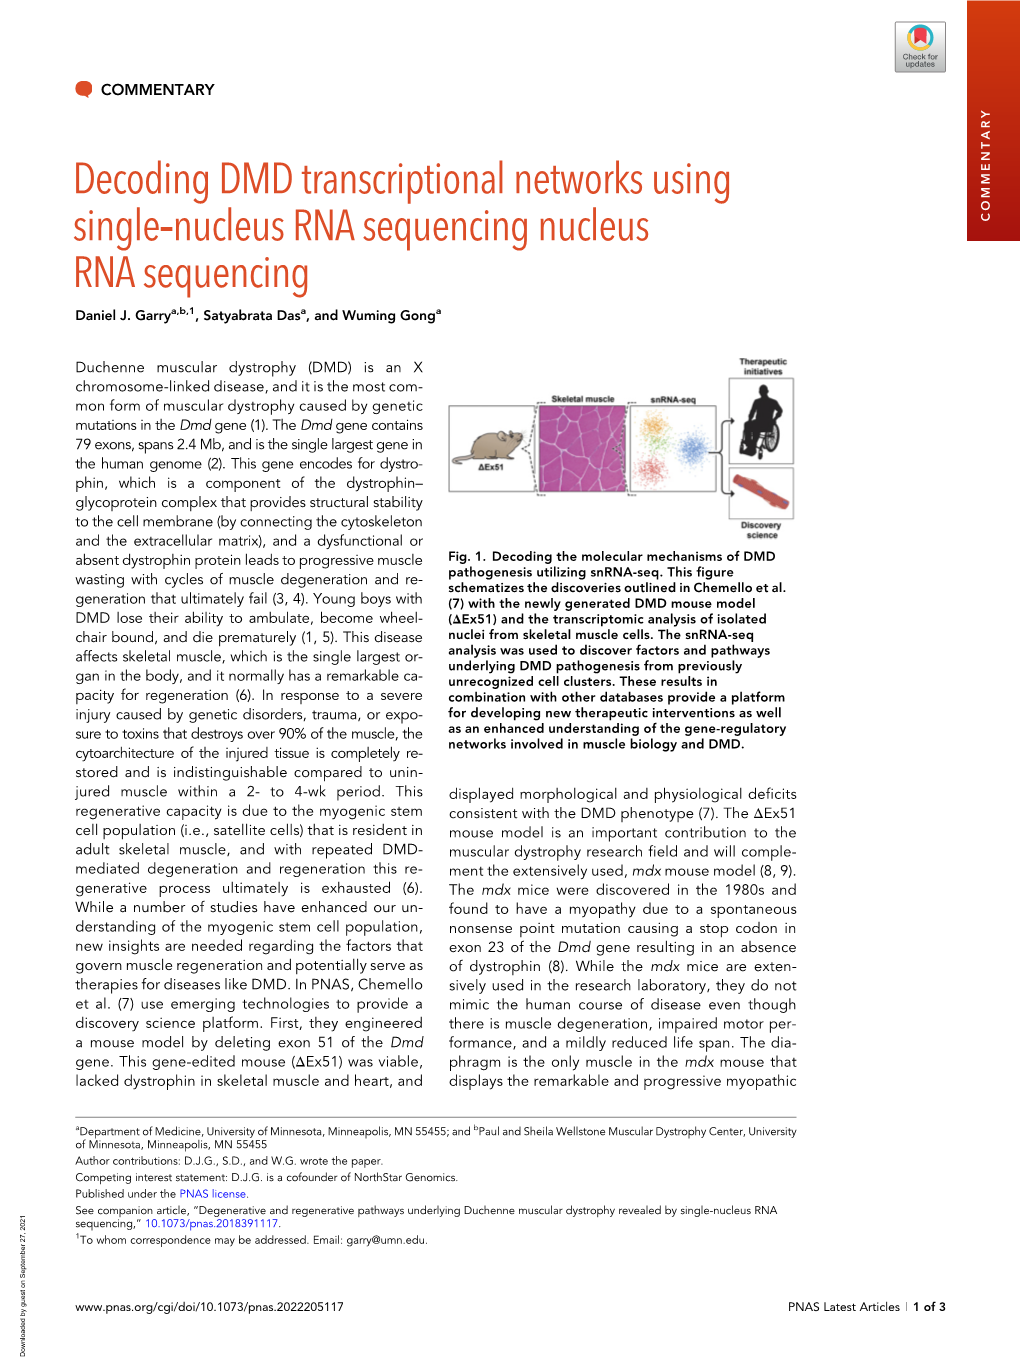 Decoding DMD Transcriptional Networks Using Single‐Nucleus RNA Sequencing Nucleus COMMENTARY RNA Sequencing Daniel J